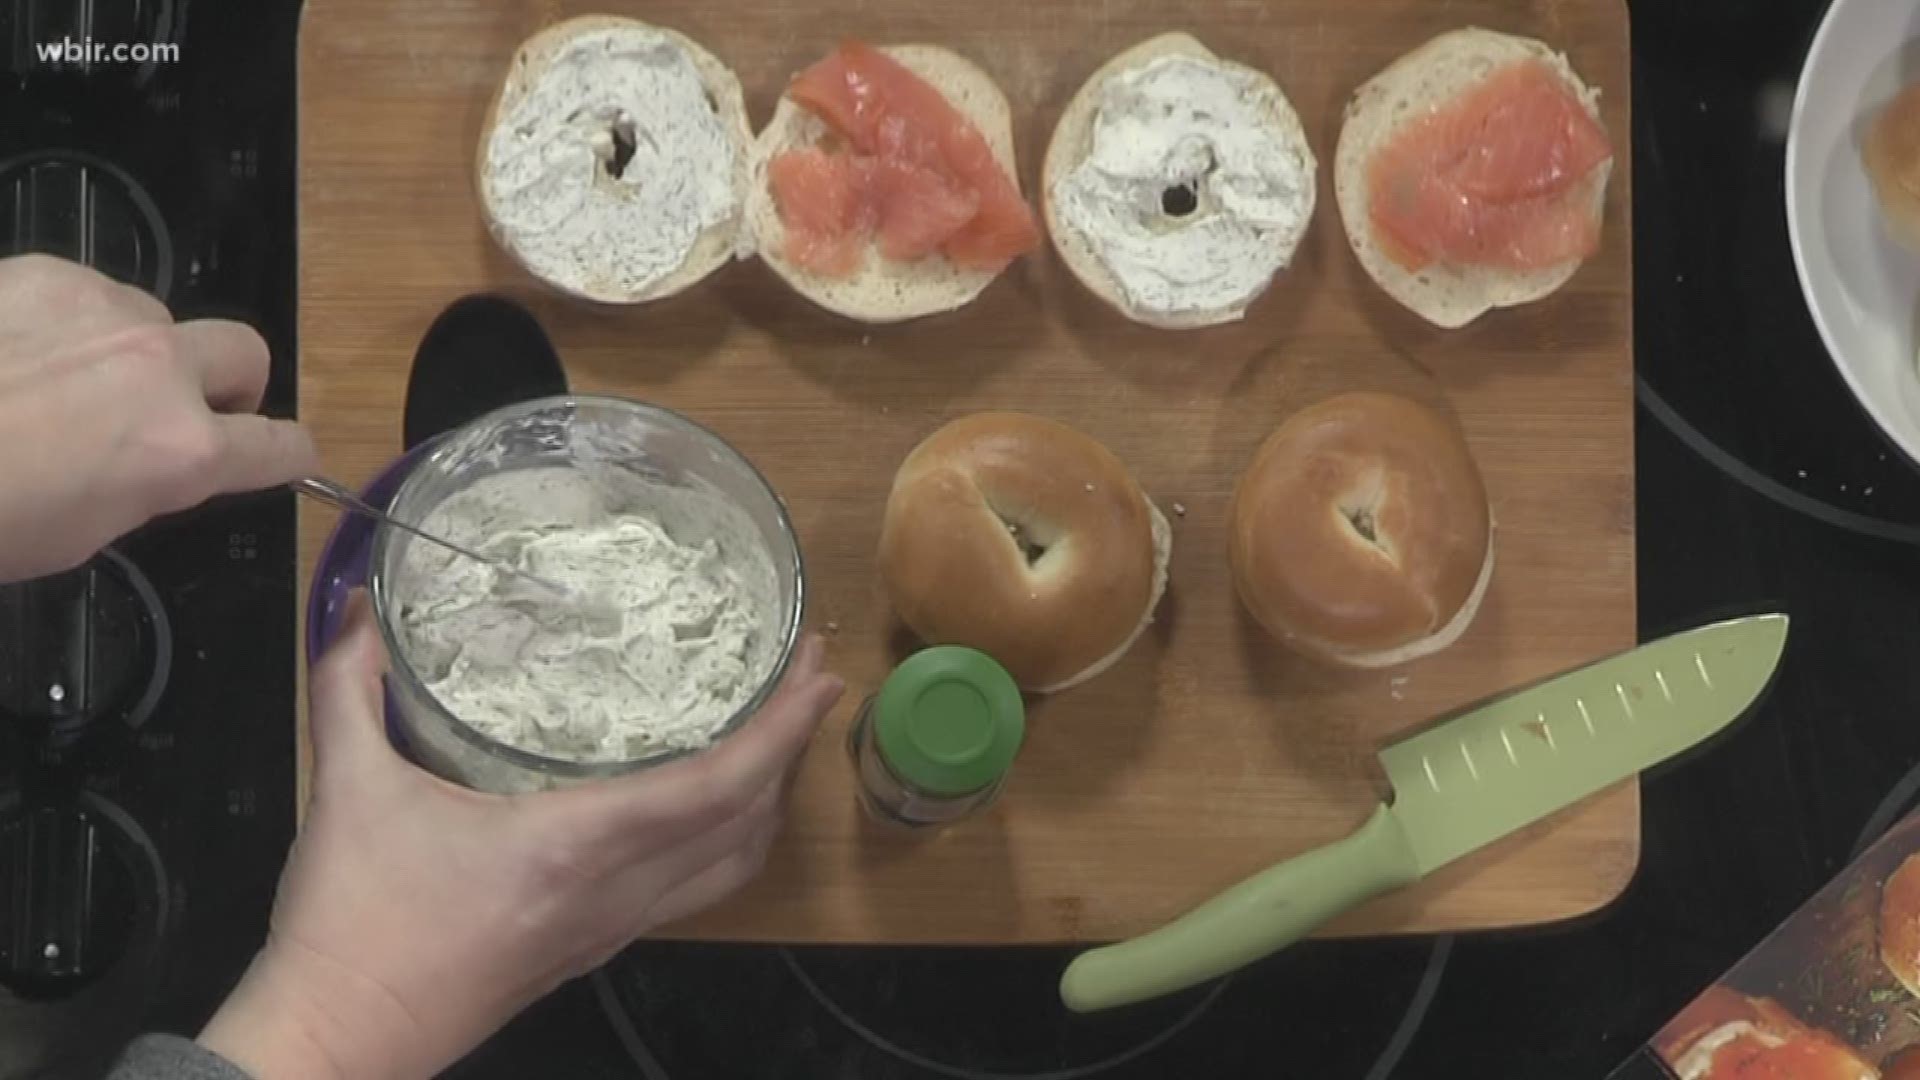 Southern Belle Simple shares how to make simple appetizers for your New Year's Eve party.